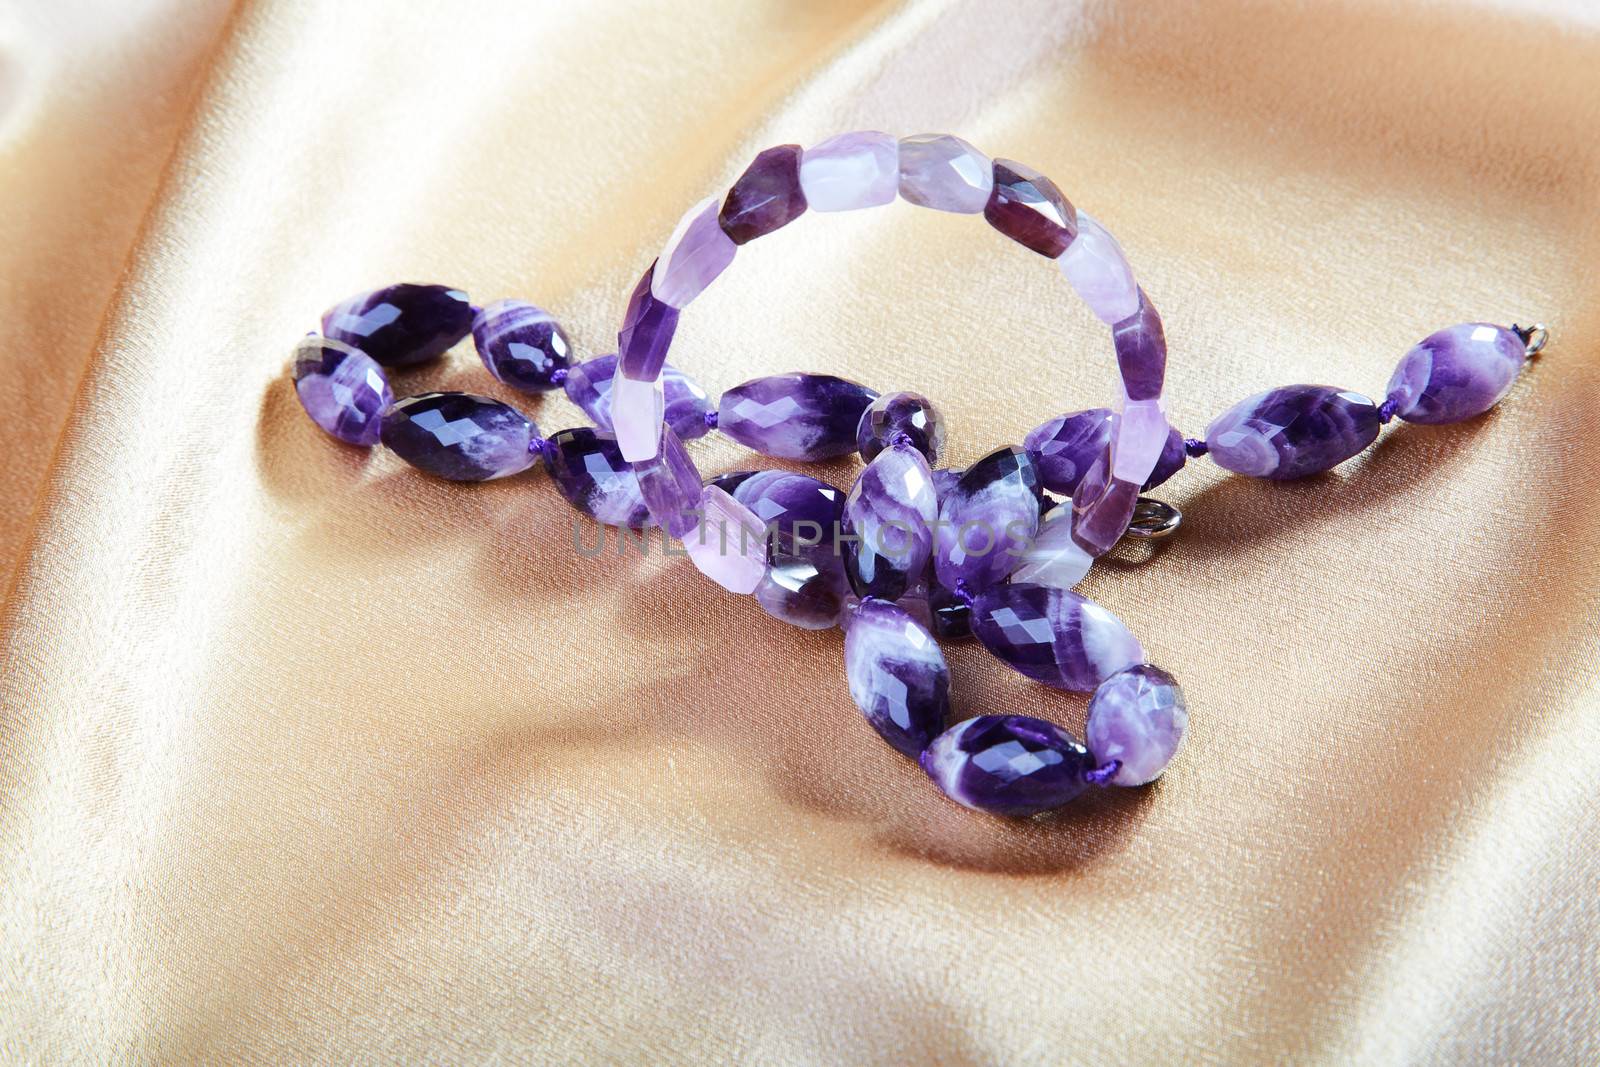 Beads and bracelet from violet glass against from a fabric